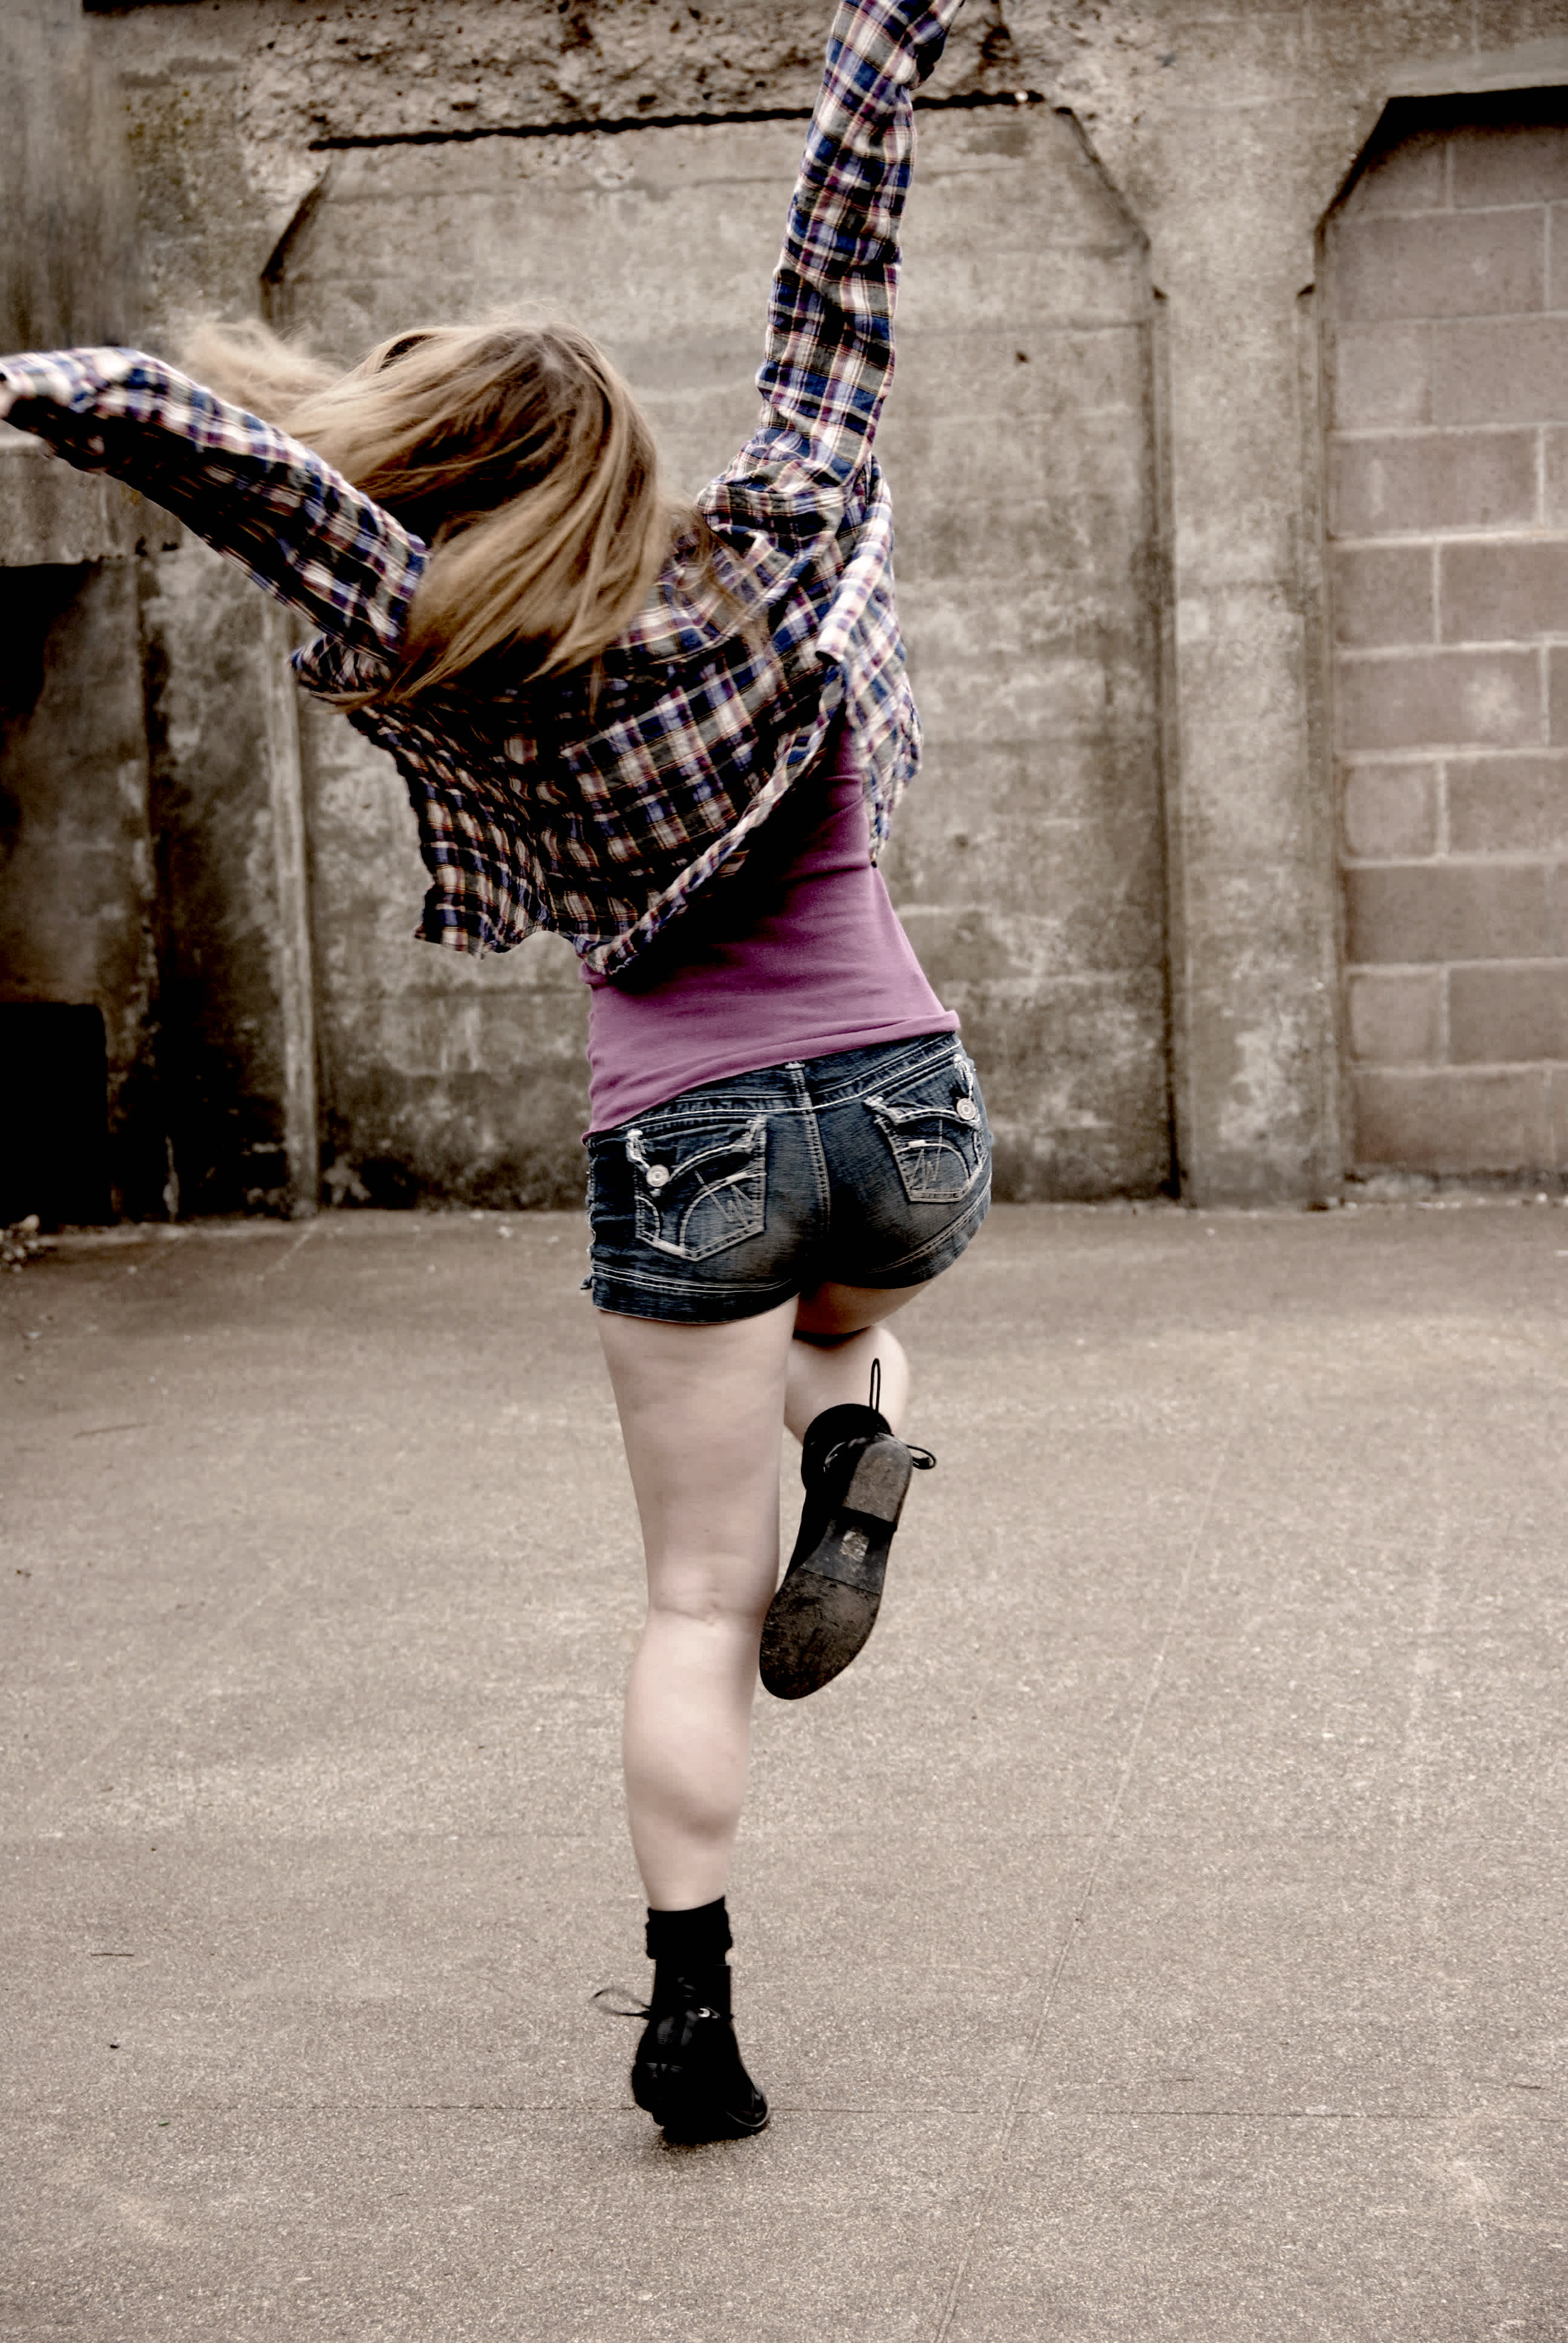 Girl jumping with arms in the arm in front of a brick wall. 